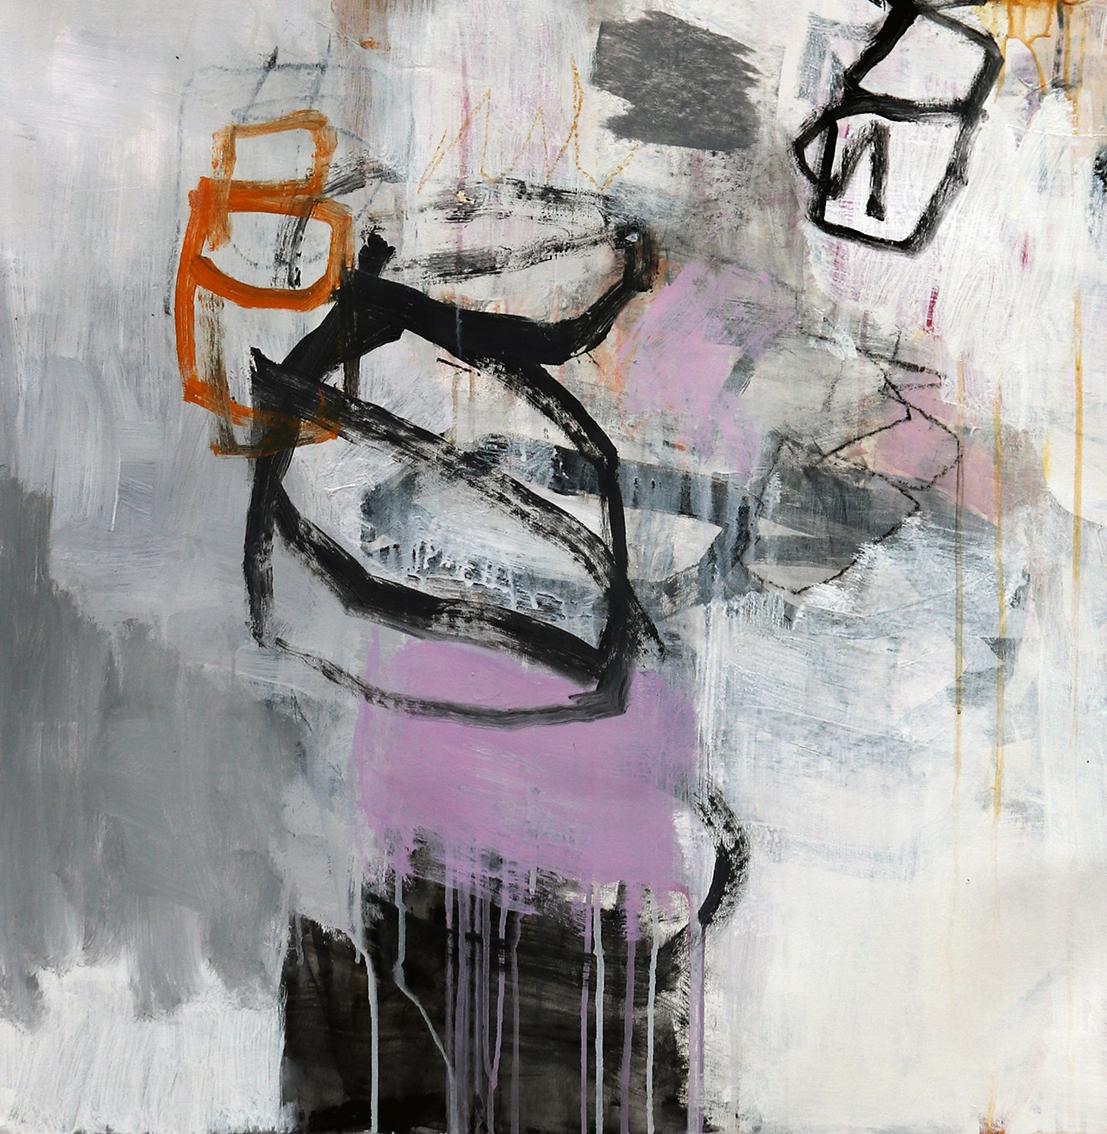 Wandering ll - Abstract Expressionist Painting by Julie Schumer